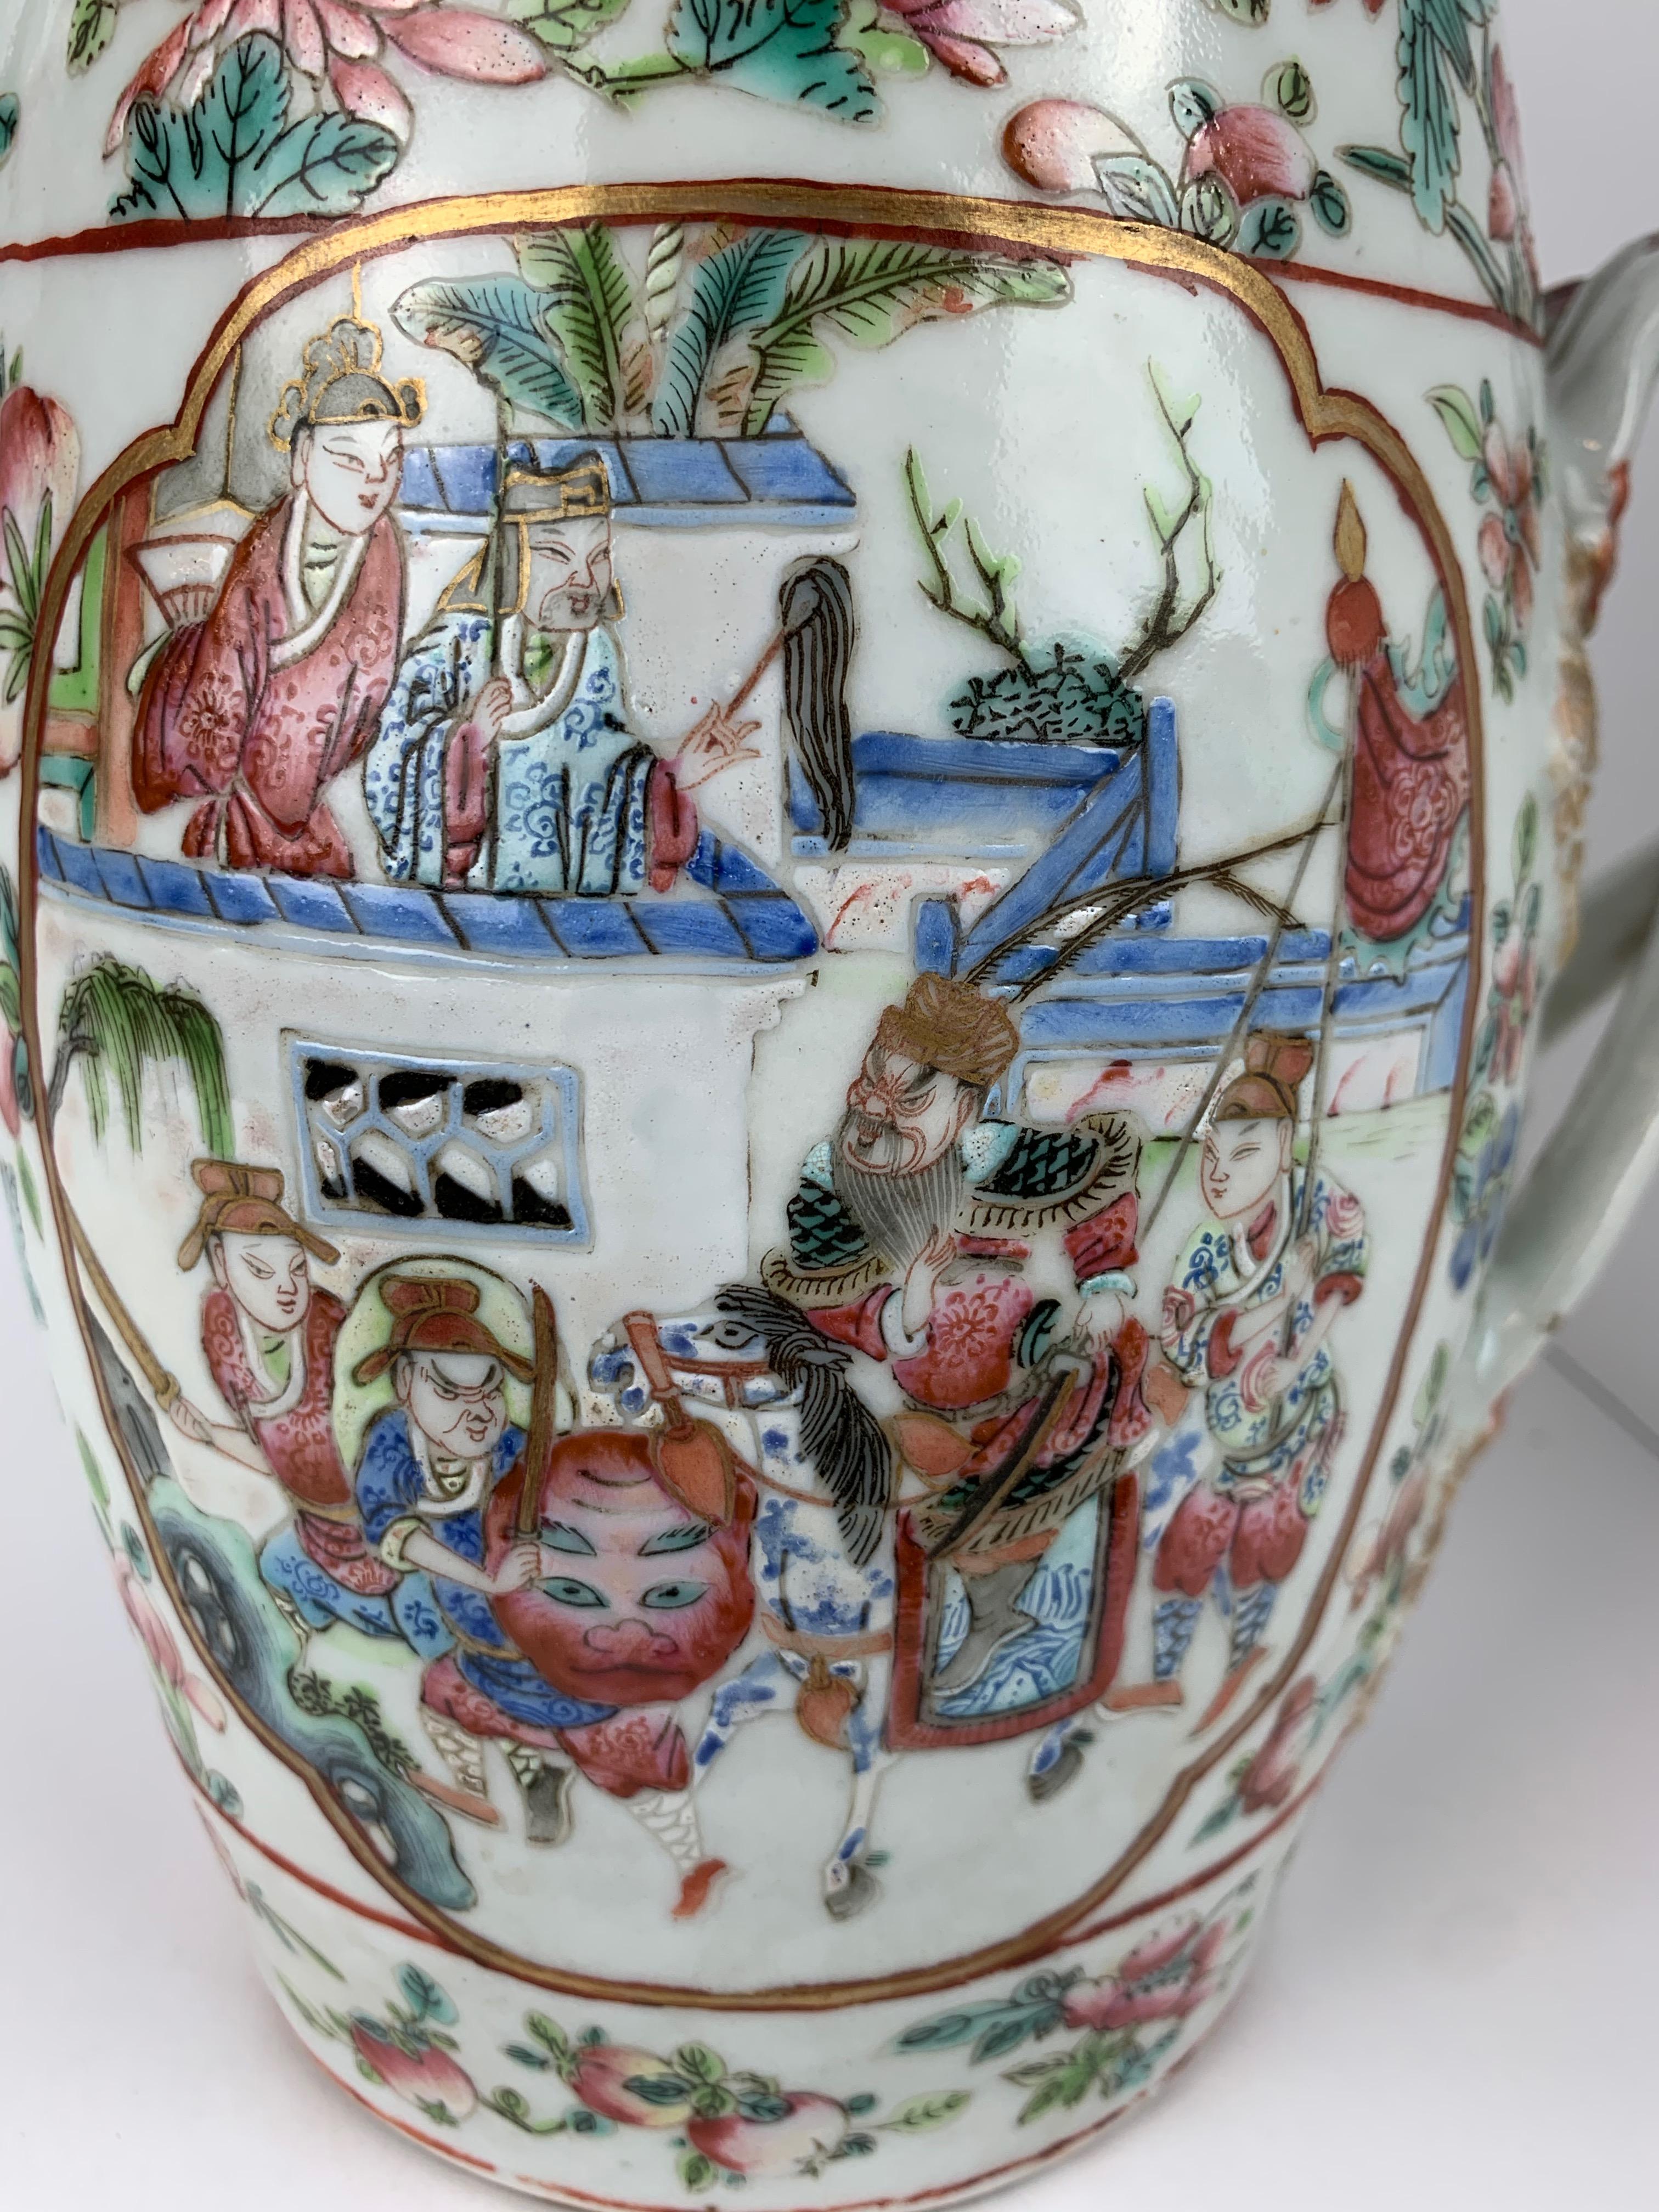 Chinese Export Rose Canton Mandarin pattern porcelain cider jug with double or cross strap handles. There are court scenes in the most colorful hues. The borders are filled with fruits and flowers. The lid is shaped like a coolies hat with a small